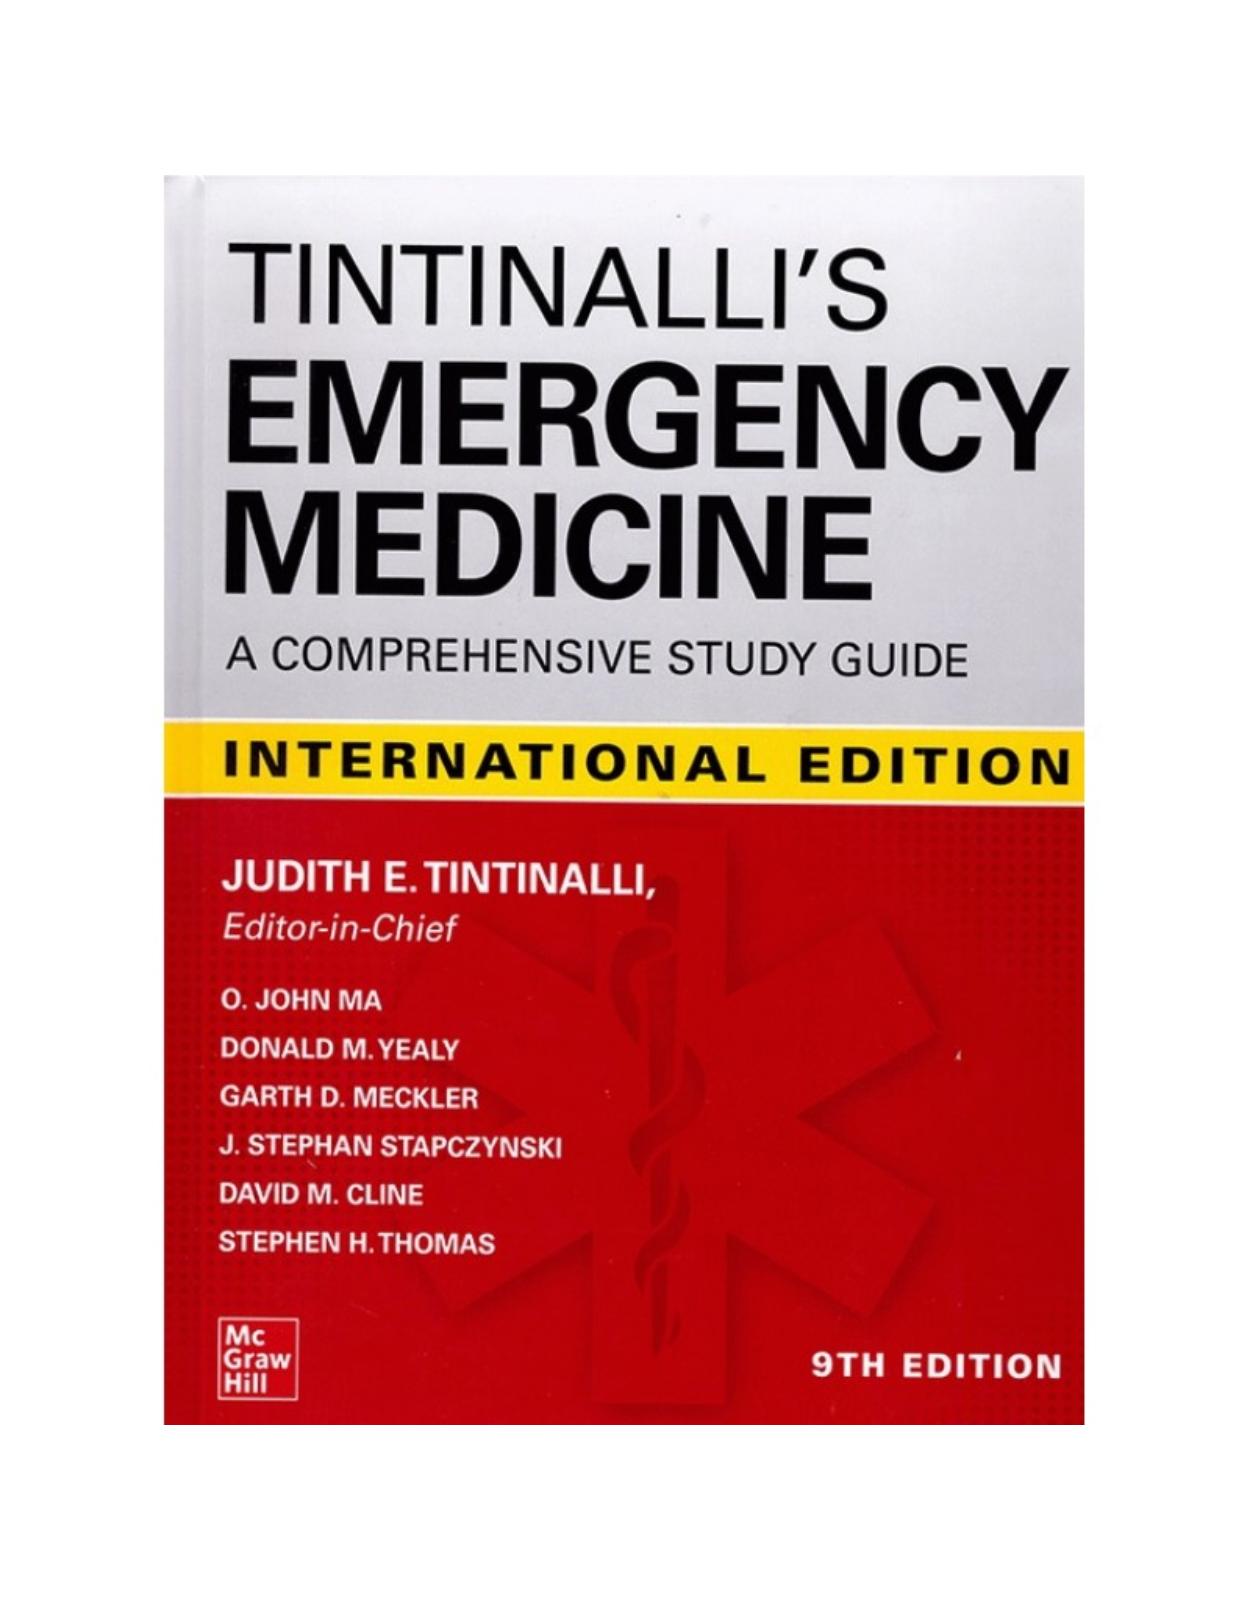 Ie Tintinalli's Emergency Medicine: A Comprehensive Study Guide, 9th Edition